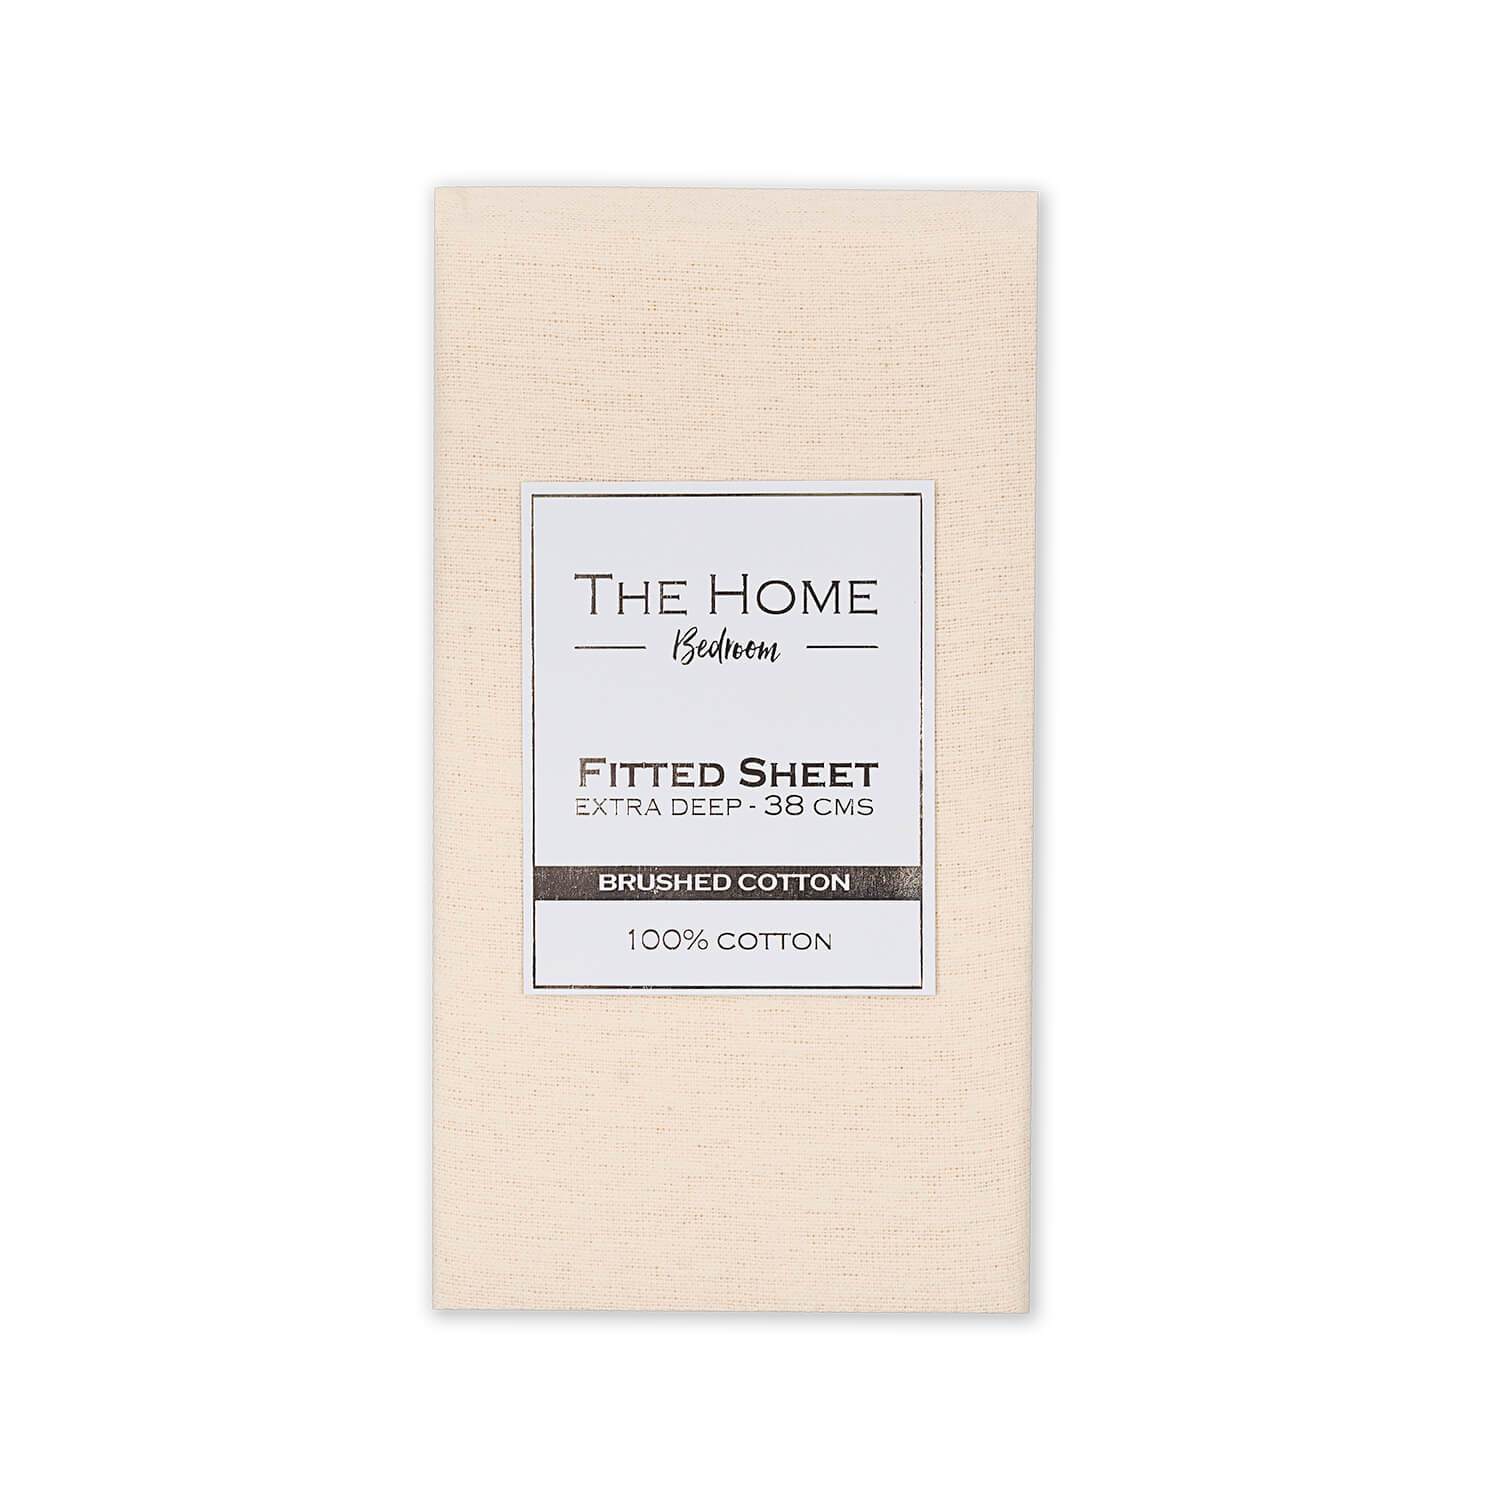 The Home Bedroom 100% Cotton Brushed Cotton Fitted Sheet - Cream 1 Shaws Department Stores